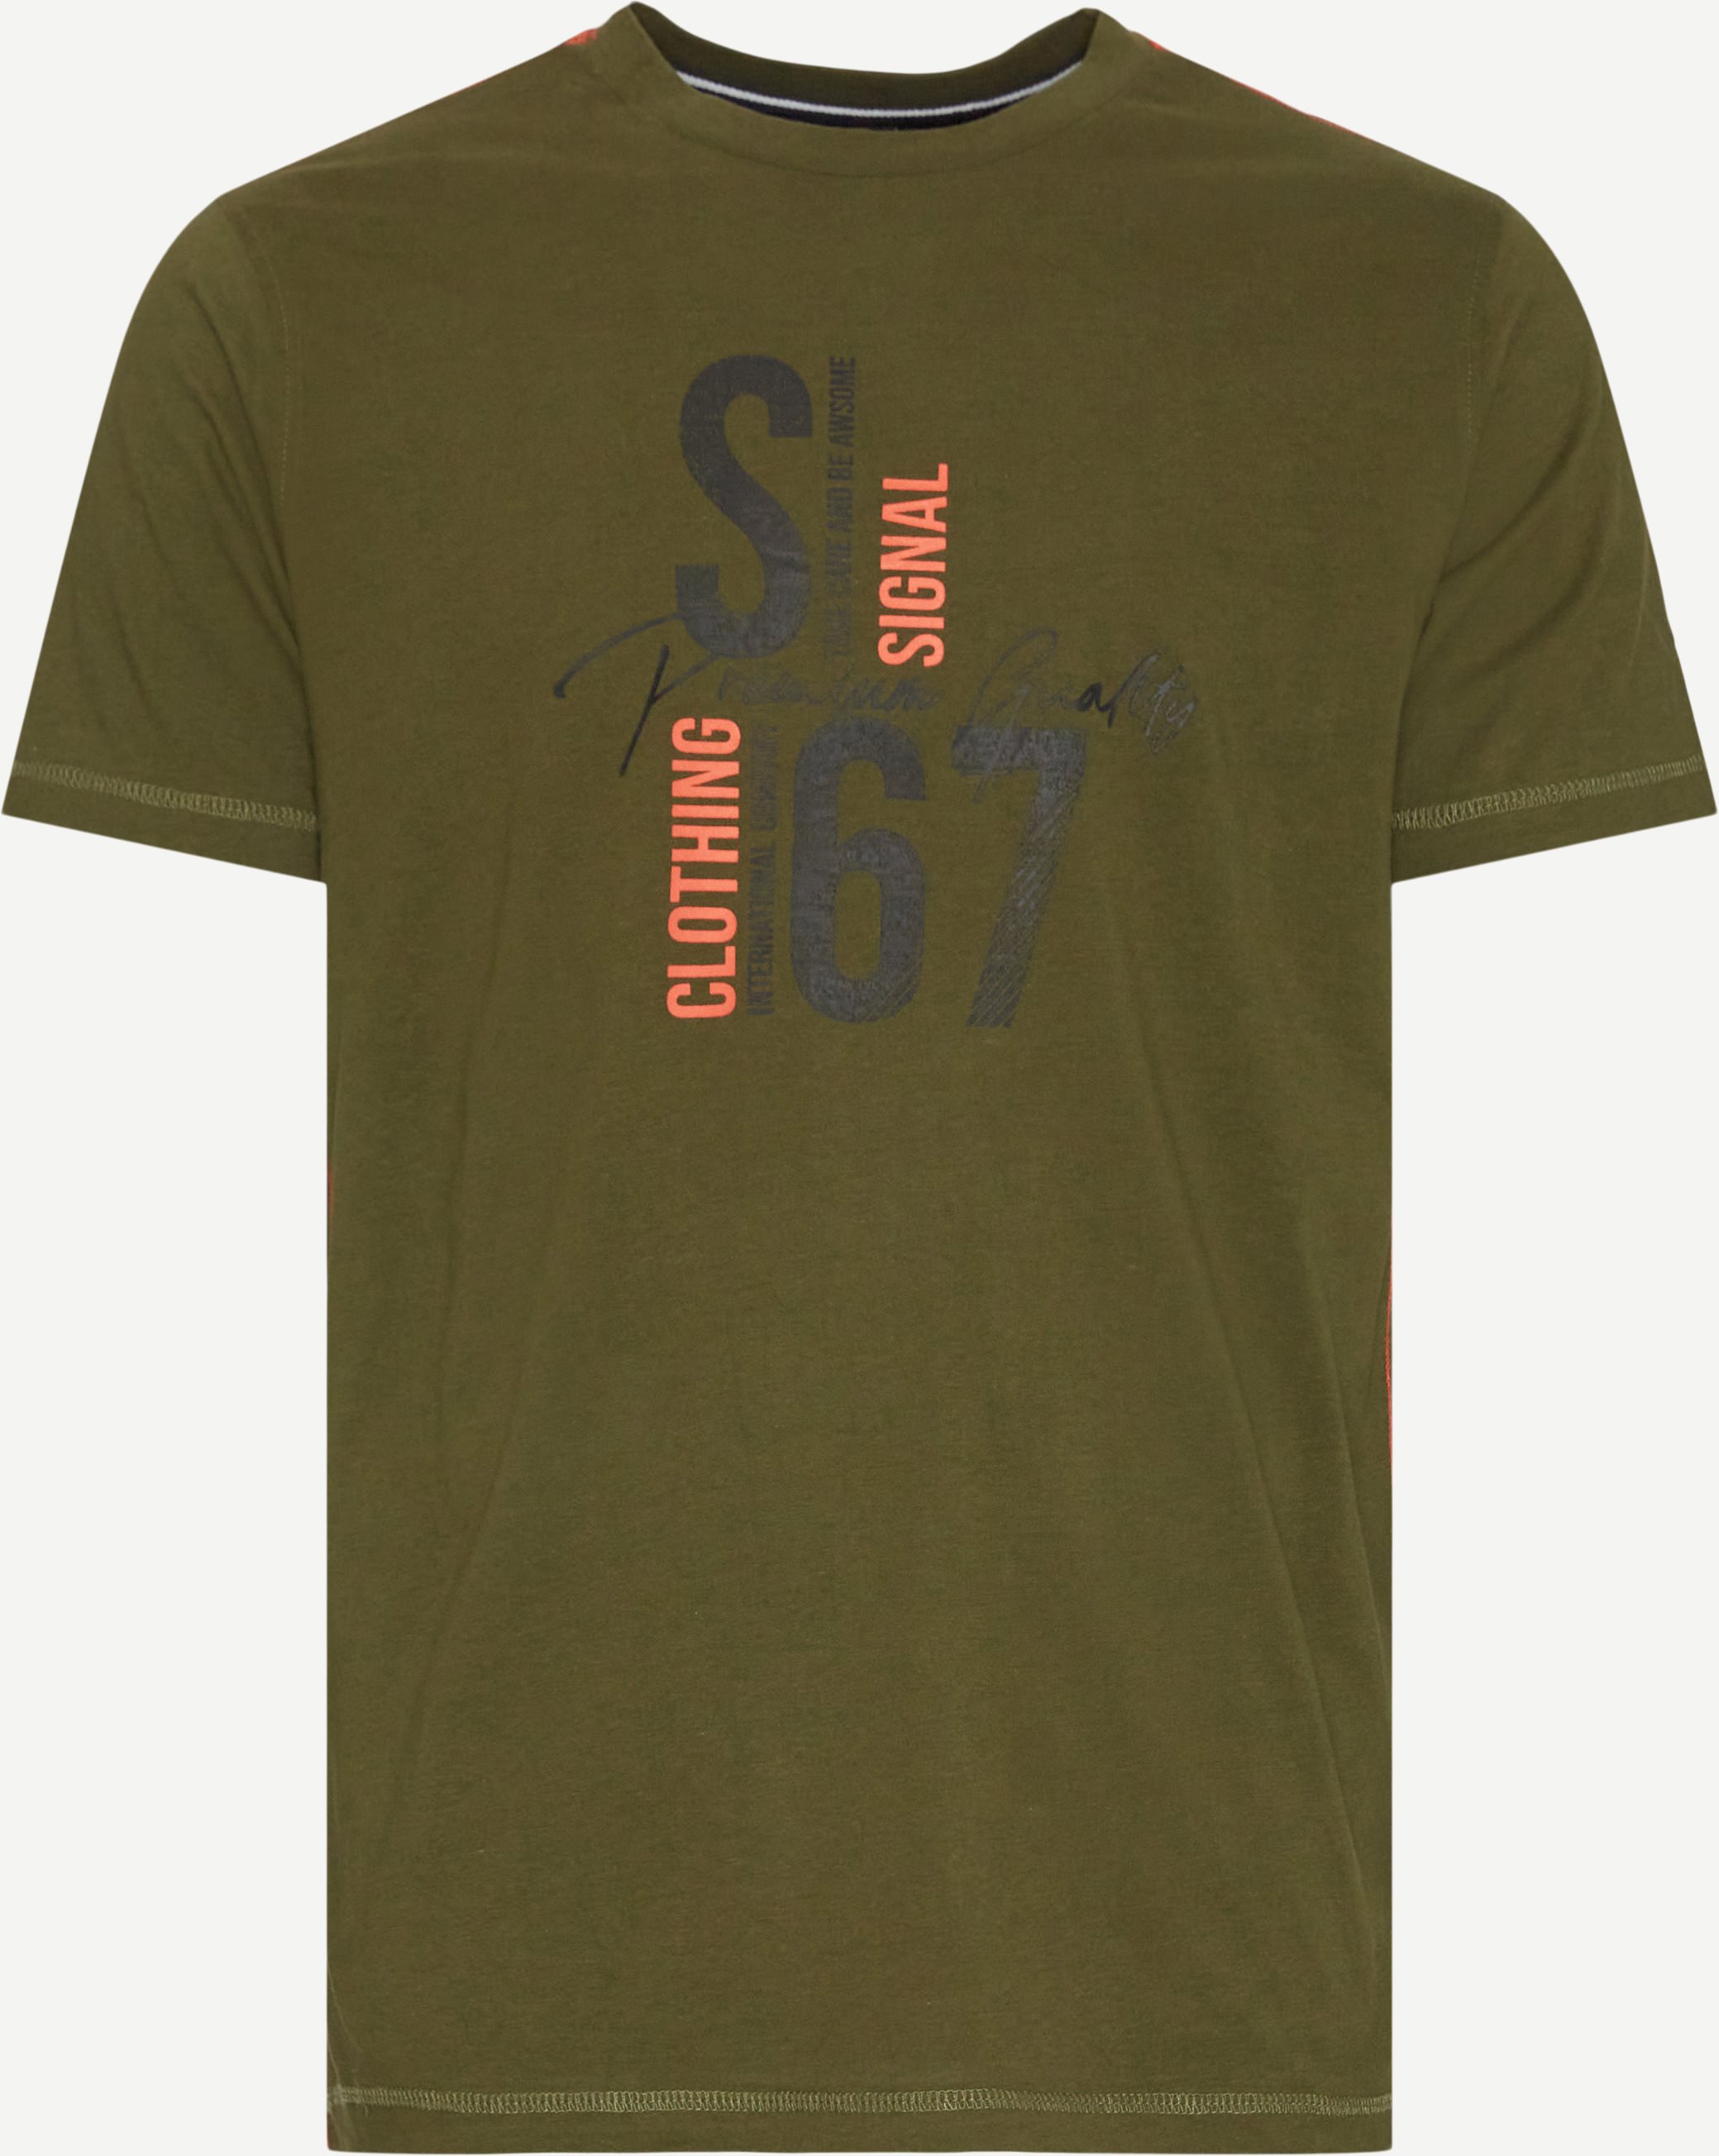 Oliver Logo Tee - T-shirts - Regular fit - Army